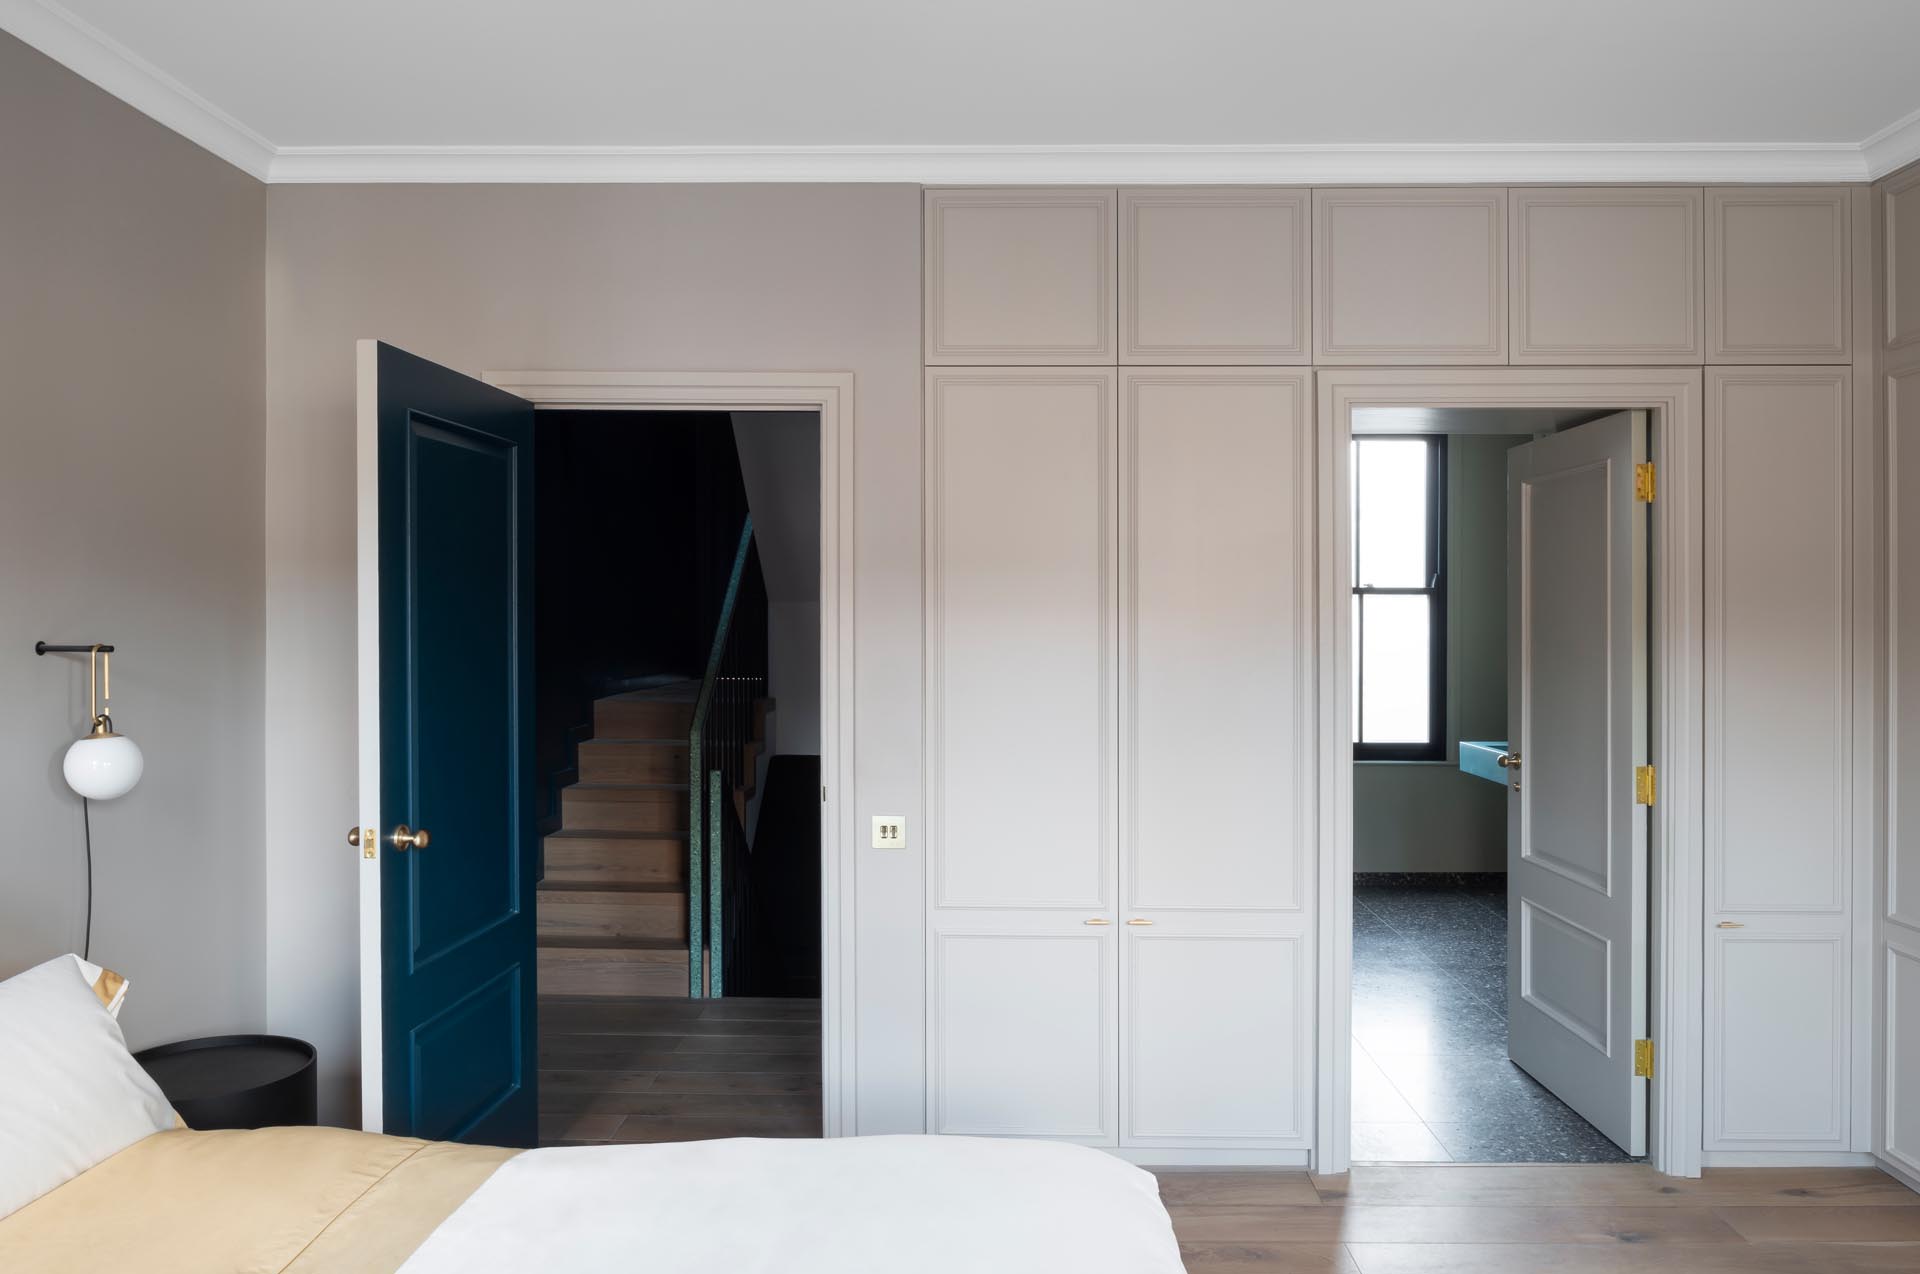 A modern bedroom with built-in closets that math the walls.